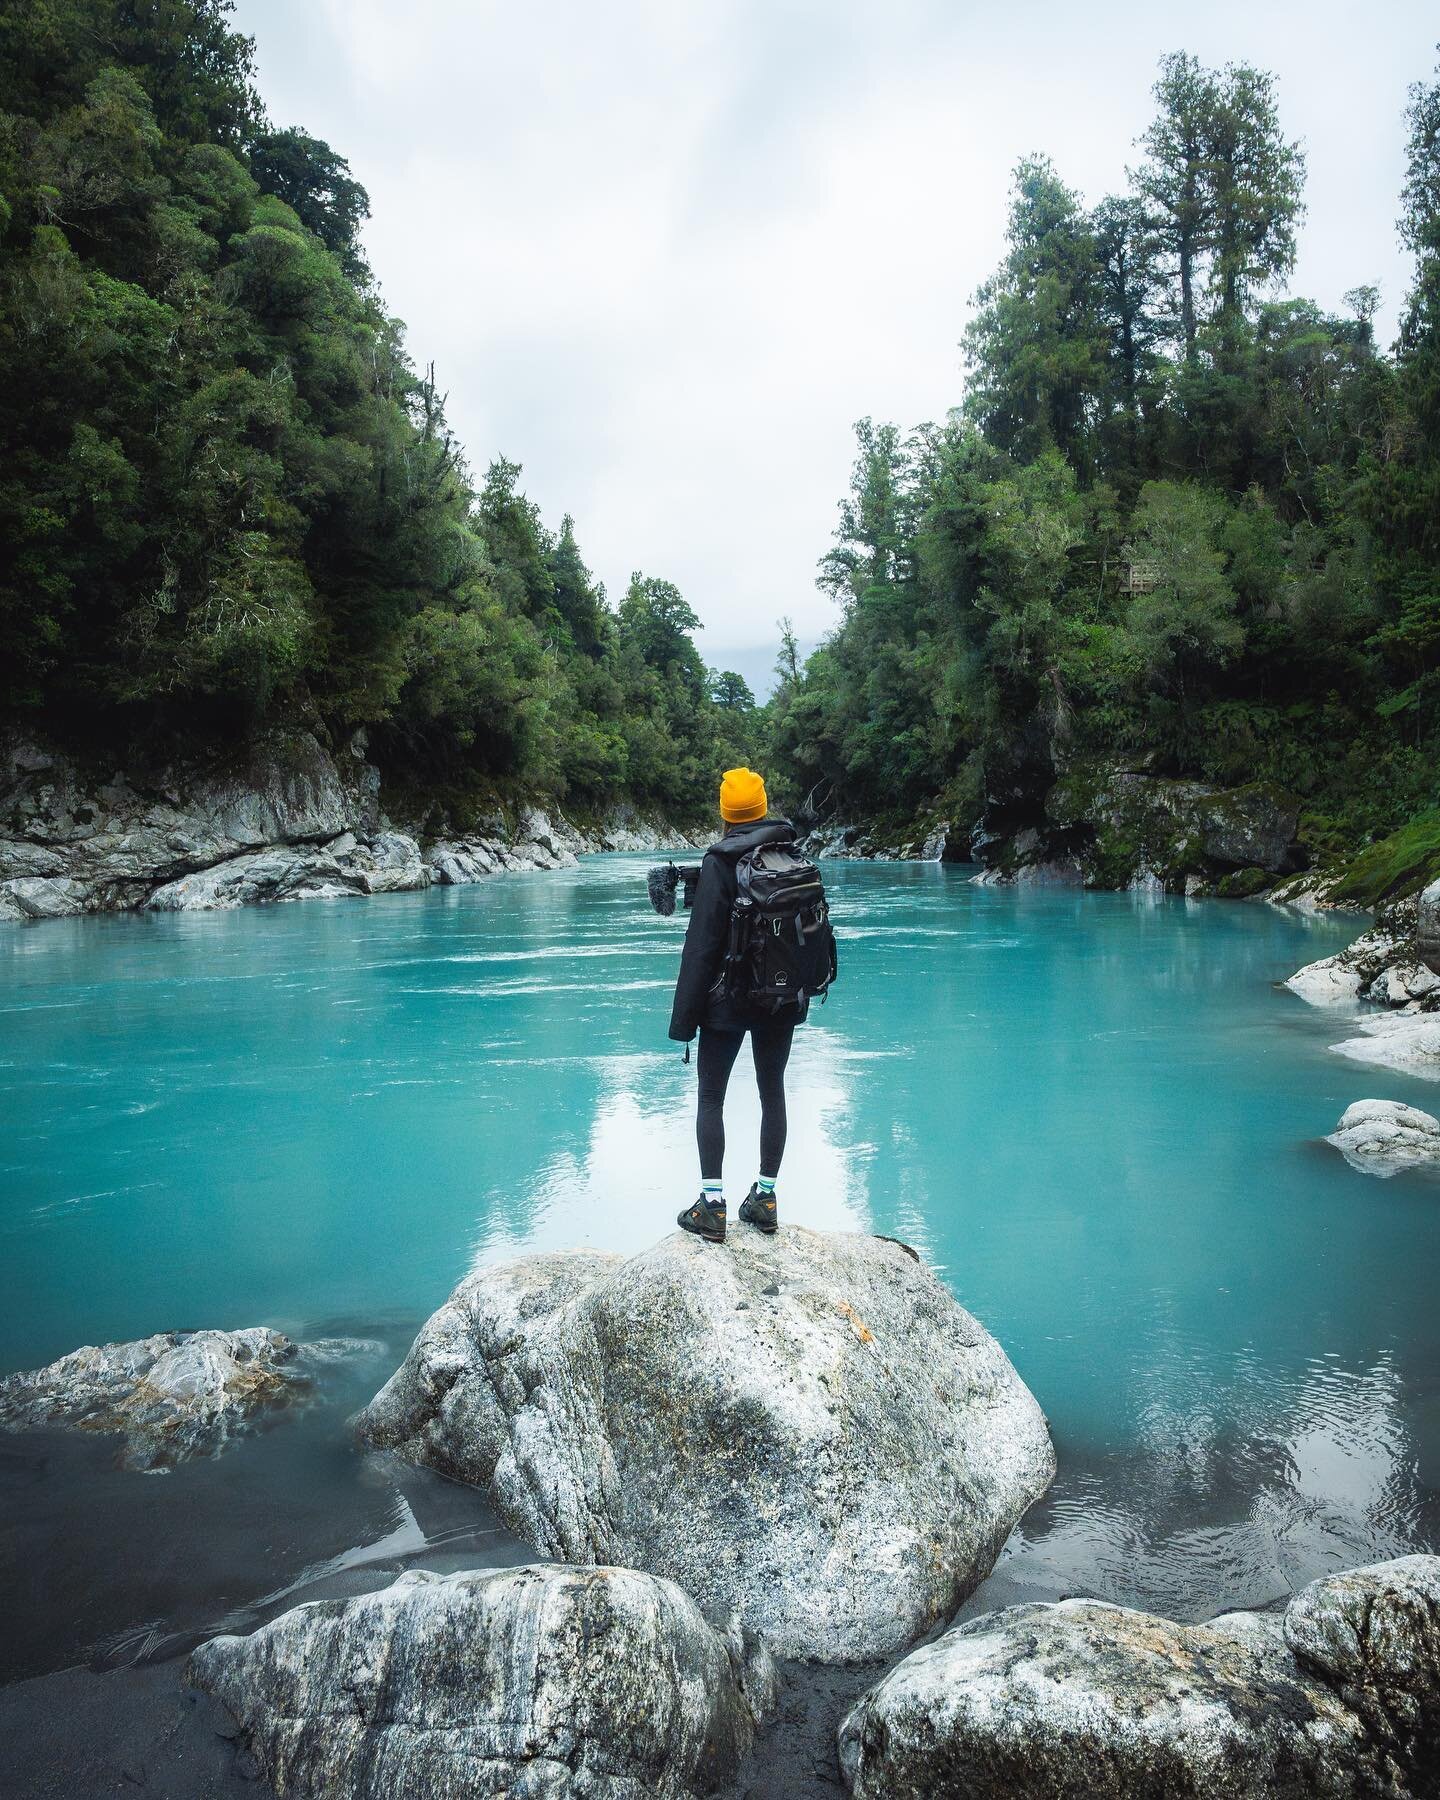 Hokitika Gorge New Zealand. One of the most blue water spots  I&rsquo;ve ever seen! Why is it so blue tho? @currently.hannah looked it up. 

Apparently glacier water gets fed in to this river. When the glacier grinds the rock underneath, it makes fin